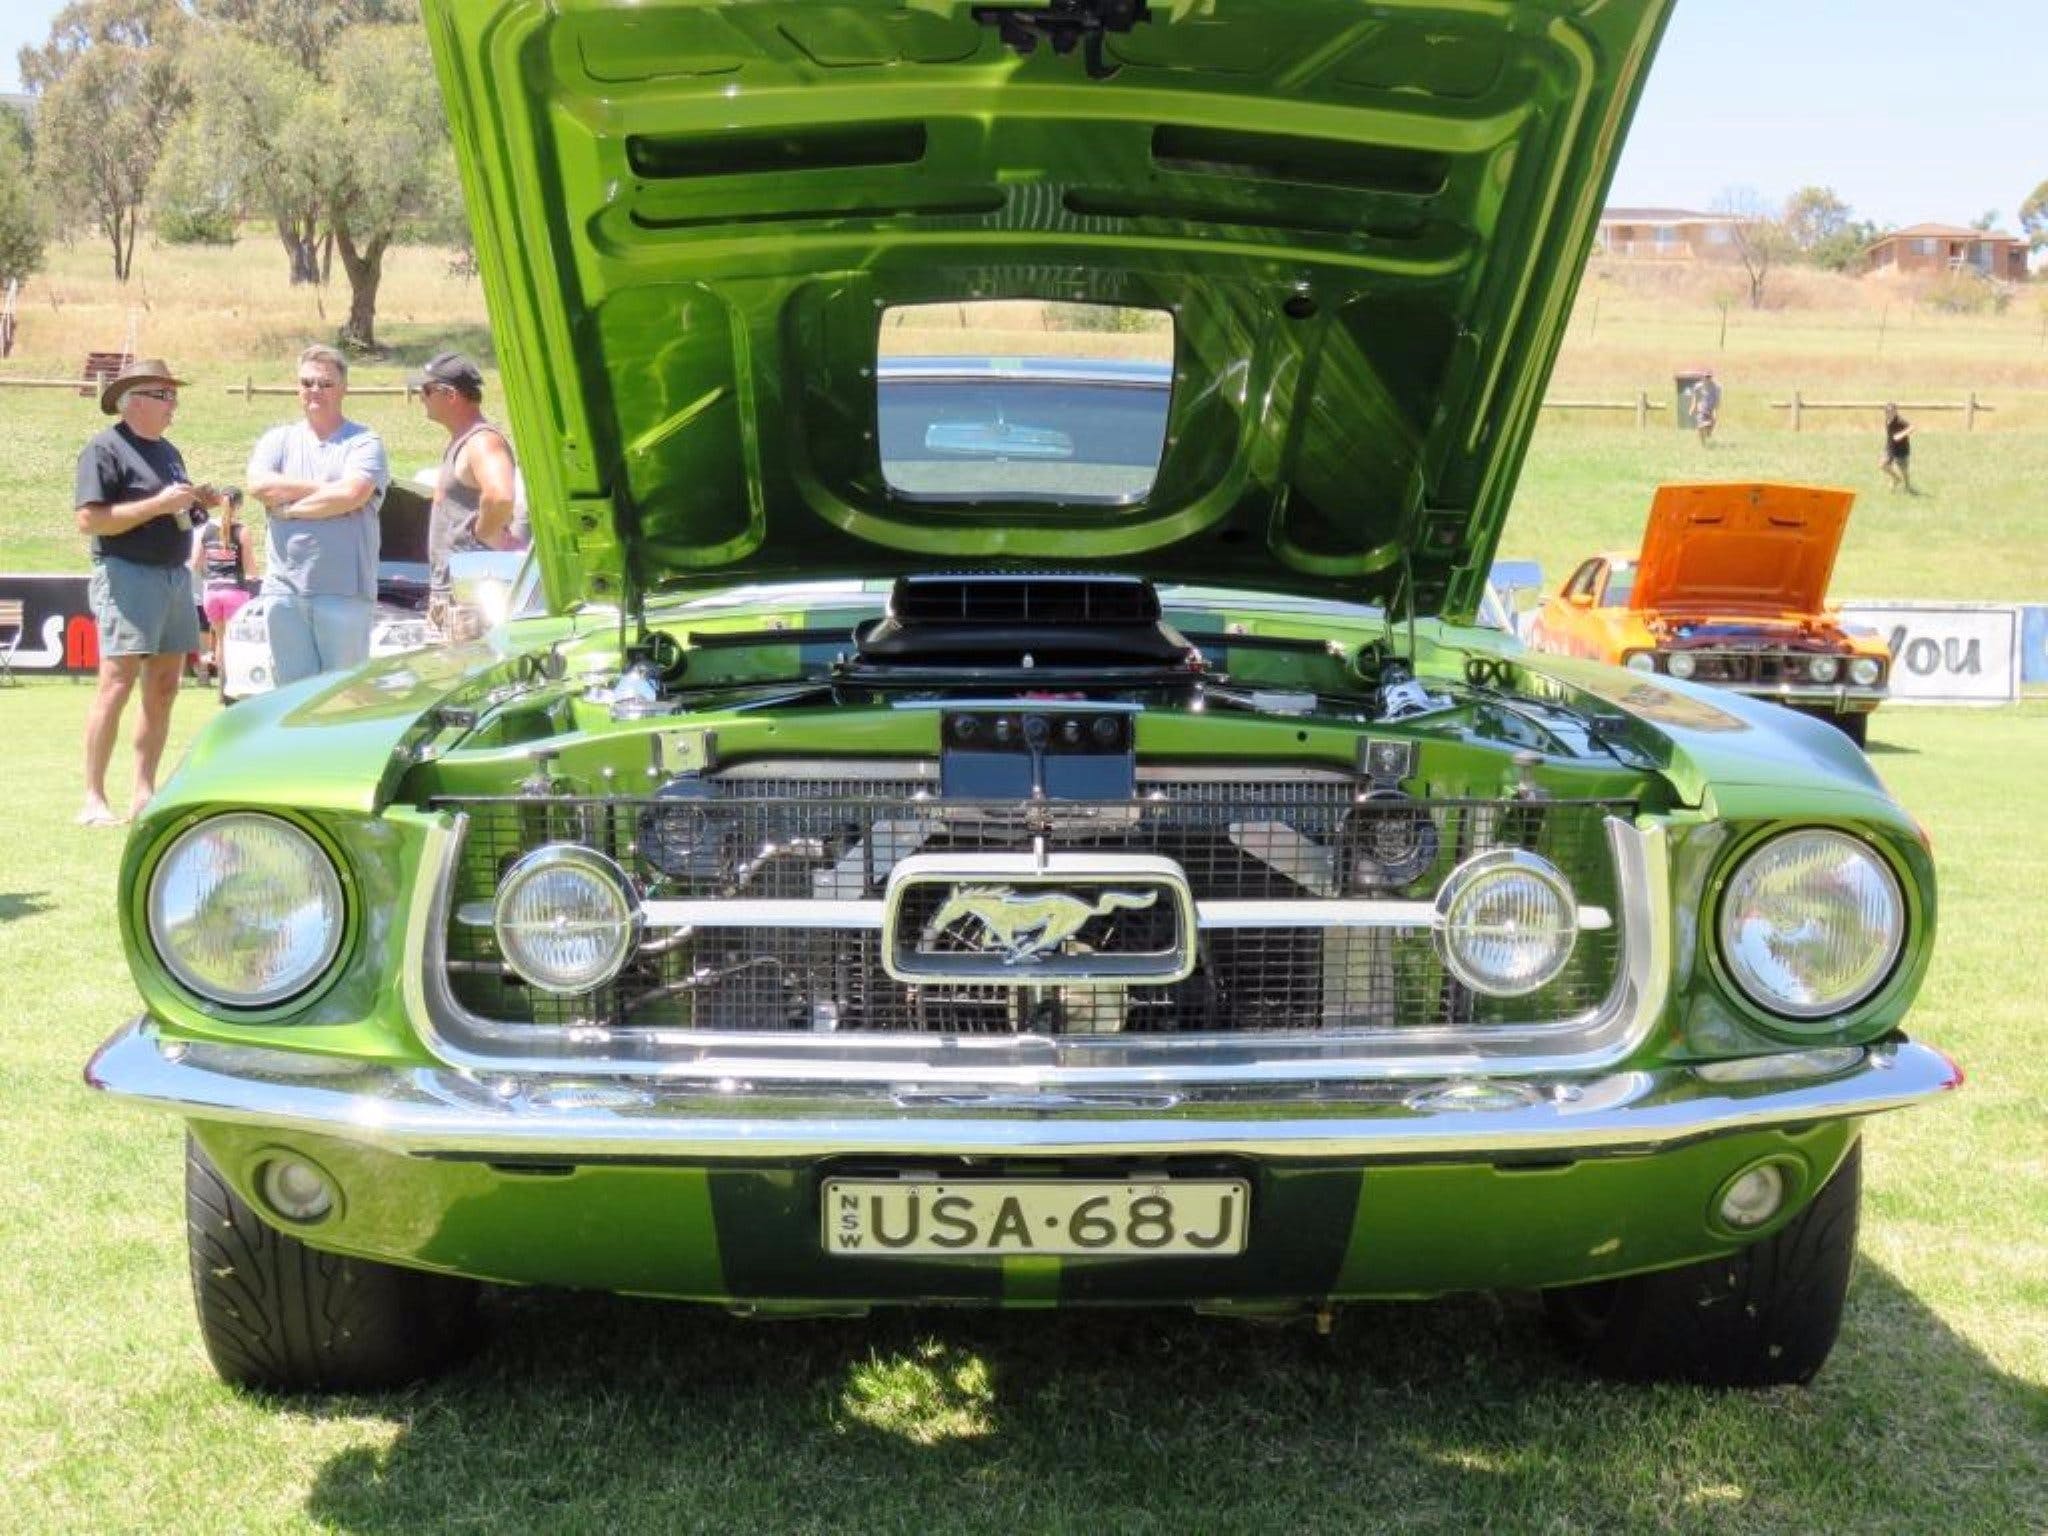 Central West Car Club Charity Show and Shine - Casino Accommodation